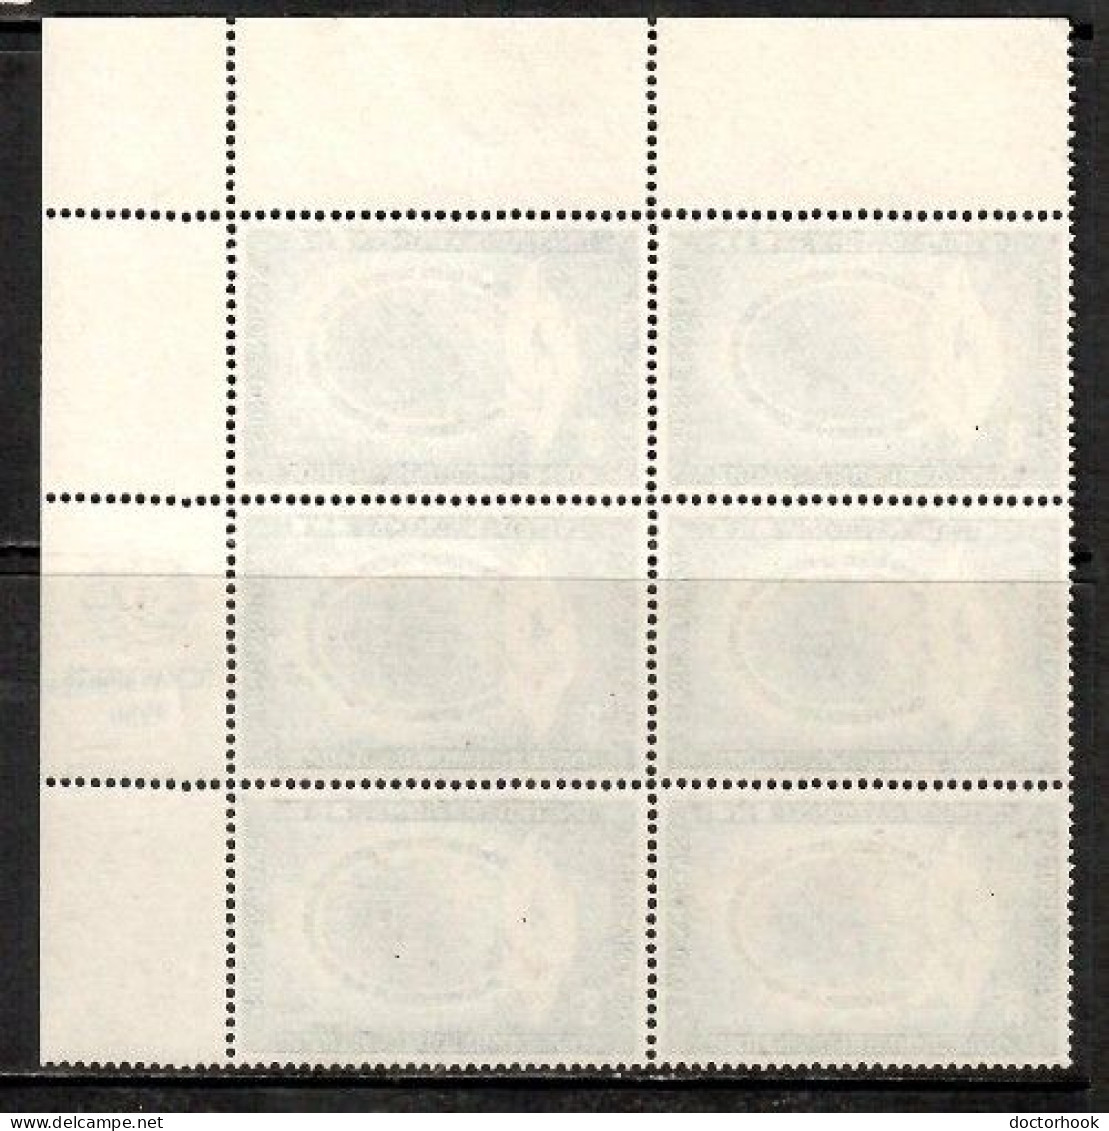 UNITED NATIONS---N.Y.  Scott # 48** MINT NH INSCRIPTION BLOCK Of 6 (CONDITION AS PER SCAN) (LG-1697) - Nuovi